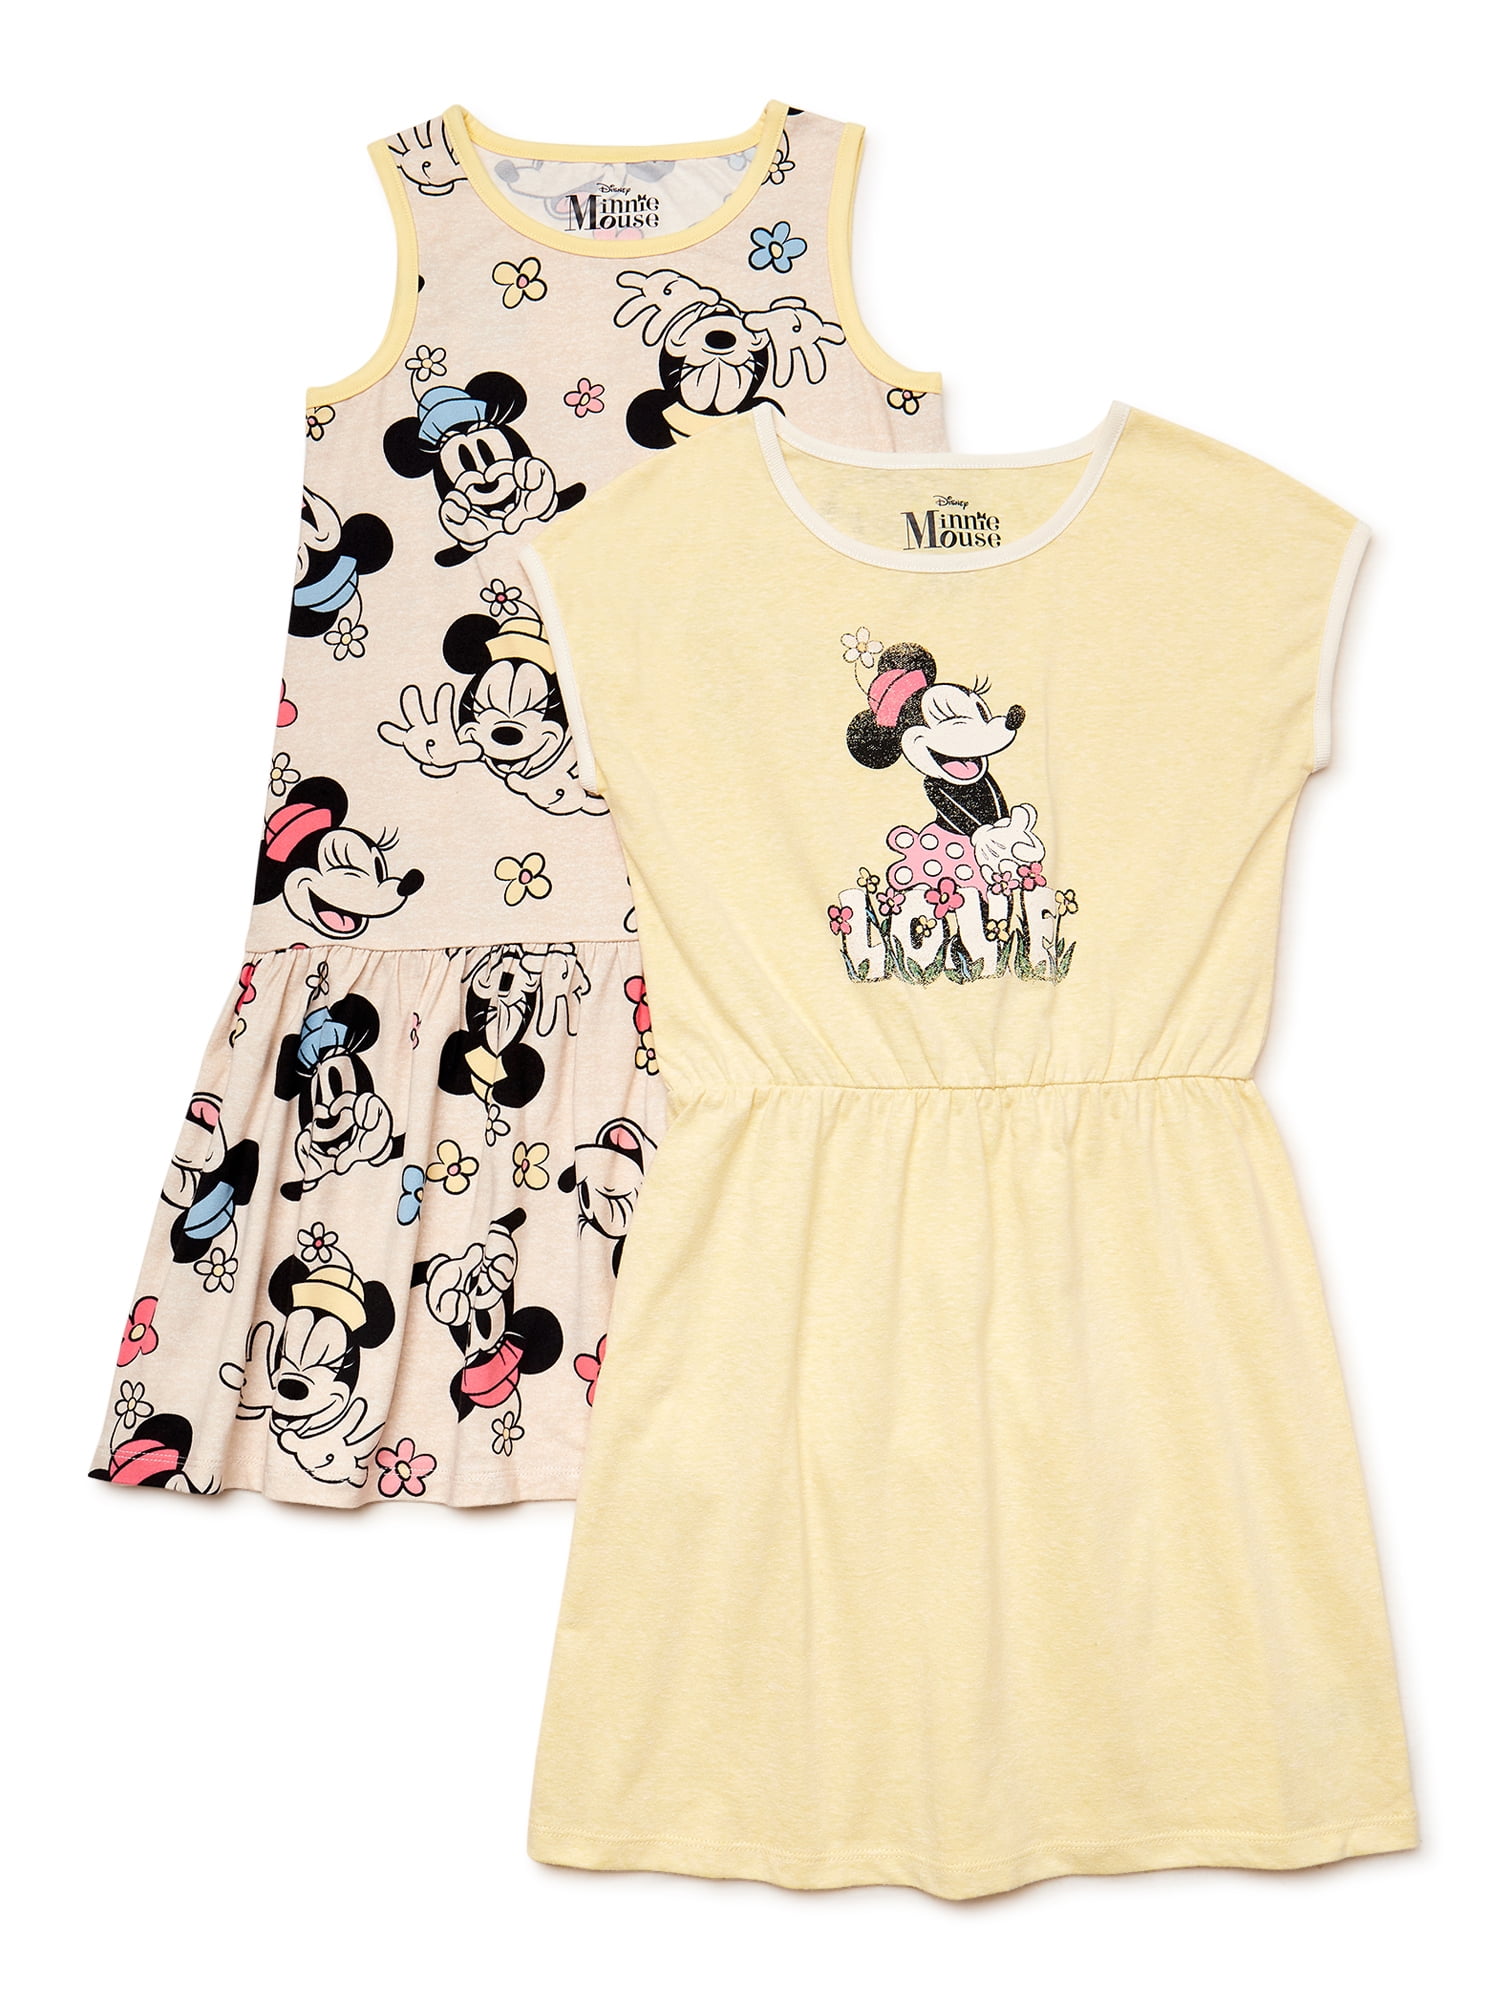 Disney Minnie Mouse Girls Play Dress, 2-Pack, Sizes 4-12